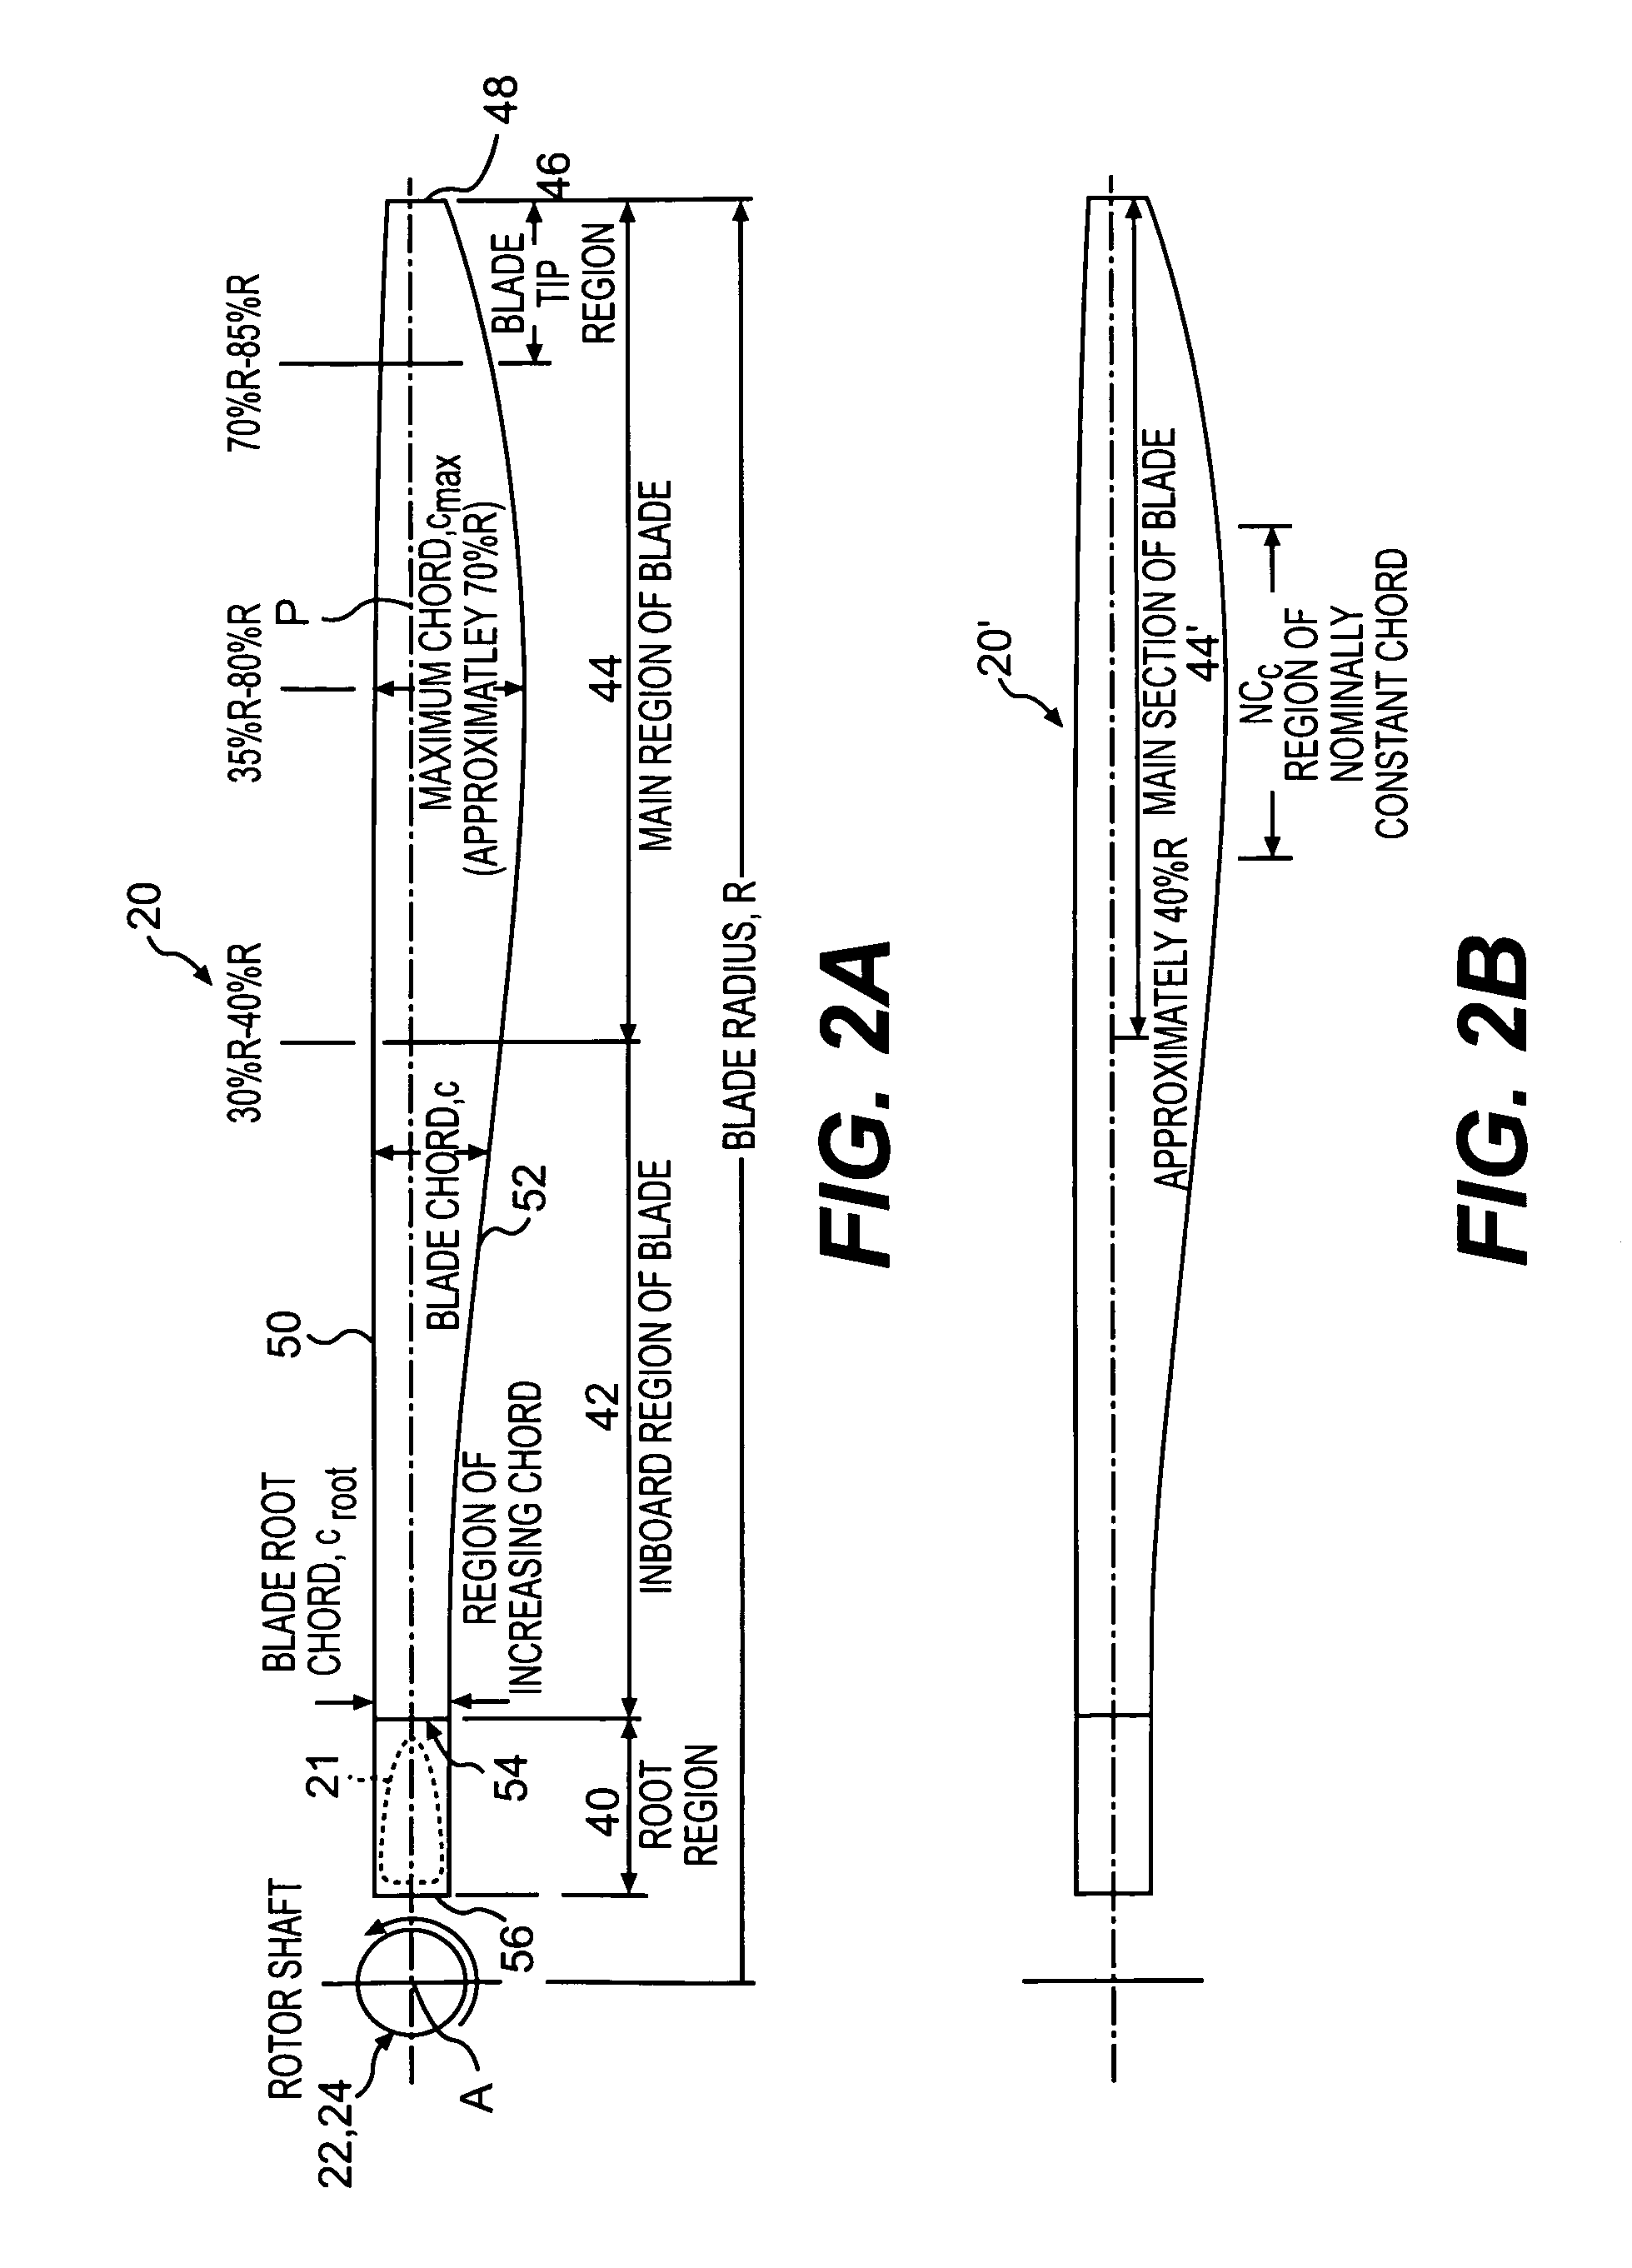 Rotor blade twist distribution for a high speed rotary-wing aircraft